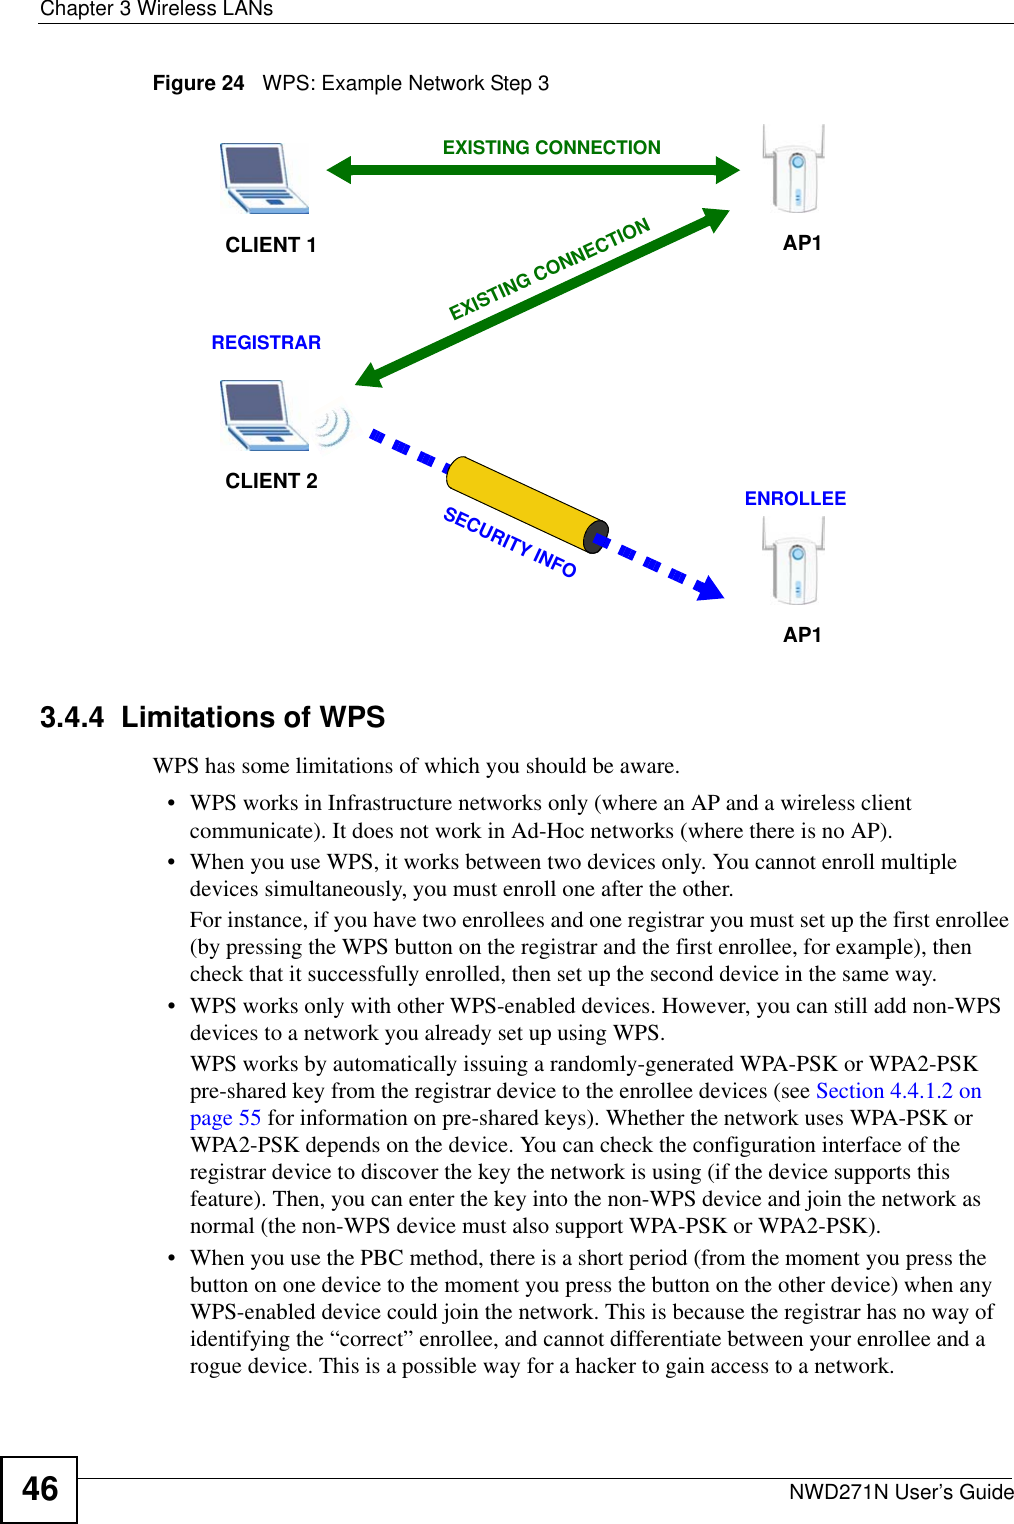 Chapter 3 Wireless LANsNWD271N User’s Guide46Figure 24   WPS: Example Network Step 33.4.4  Limitations of WPSWPS has some limitations of which you should be aware. • WPS works in Infrastructure networks only (where an AP and a wireless client communicate). It does not work in Ad-Hoc networks (where there is no AP).• When you use WPS, it works between two devices only. You cannot enroll multiple devices simultaneously, you must enroll one after the other. For instance, if you have two enrollees and one registrar you must set up the first enrollee (by pressing the WPS button on the registrar and the first enrollee, for example), then check that it successfully enrolled, then set up the second device in the same way.• WPS works only with other WPS-enabled devices. However, you can still add non-WPS devices to a network you already set up using WPS. WPS works by automatically issuing a randomly-generated WPA-PSK or WPA2-PSK pre-shared key from the registrar device to the enrollee devices (see Section 4.4.1.2 on page 55 for information on pre-shared keys). Whether the network uses WPA-PSK or WPA2-PSK depends on the device. You can check the configuration interface of the registrar device to discover the key the network is using (if the device supports this feature). Then, you can enter the key into the non-WPS device and join the network as normal (the non-WPS device must also support WPA-PSK or WPA2-PSK).• When you use the PBC method, there is a short period (from the moment you press the button on one device to the moment you press the button on the other device) when any WPS-enabled device could join the network. This is because the registrar has no way of identifying the “correct” enrollee, and cannot differentiate between your enrollee and a rogue device. This is a possible way for a hacker to gain access to a network.CLIENT 1 AP1REGISTRARCLIENT 2EXISTING CONNECTIONSECURITY INFOENROLLEEAP1EXISTING CONNECTION